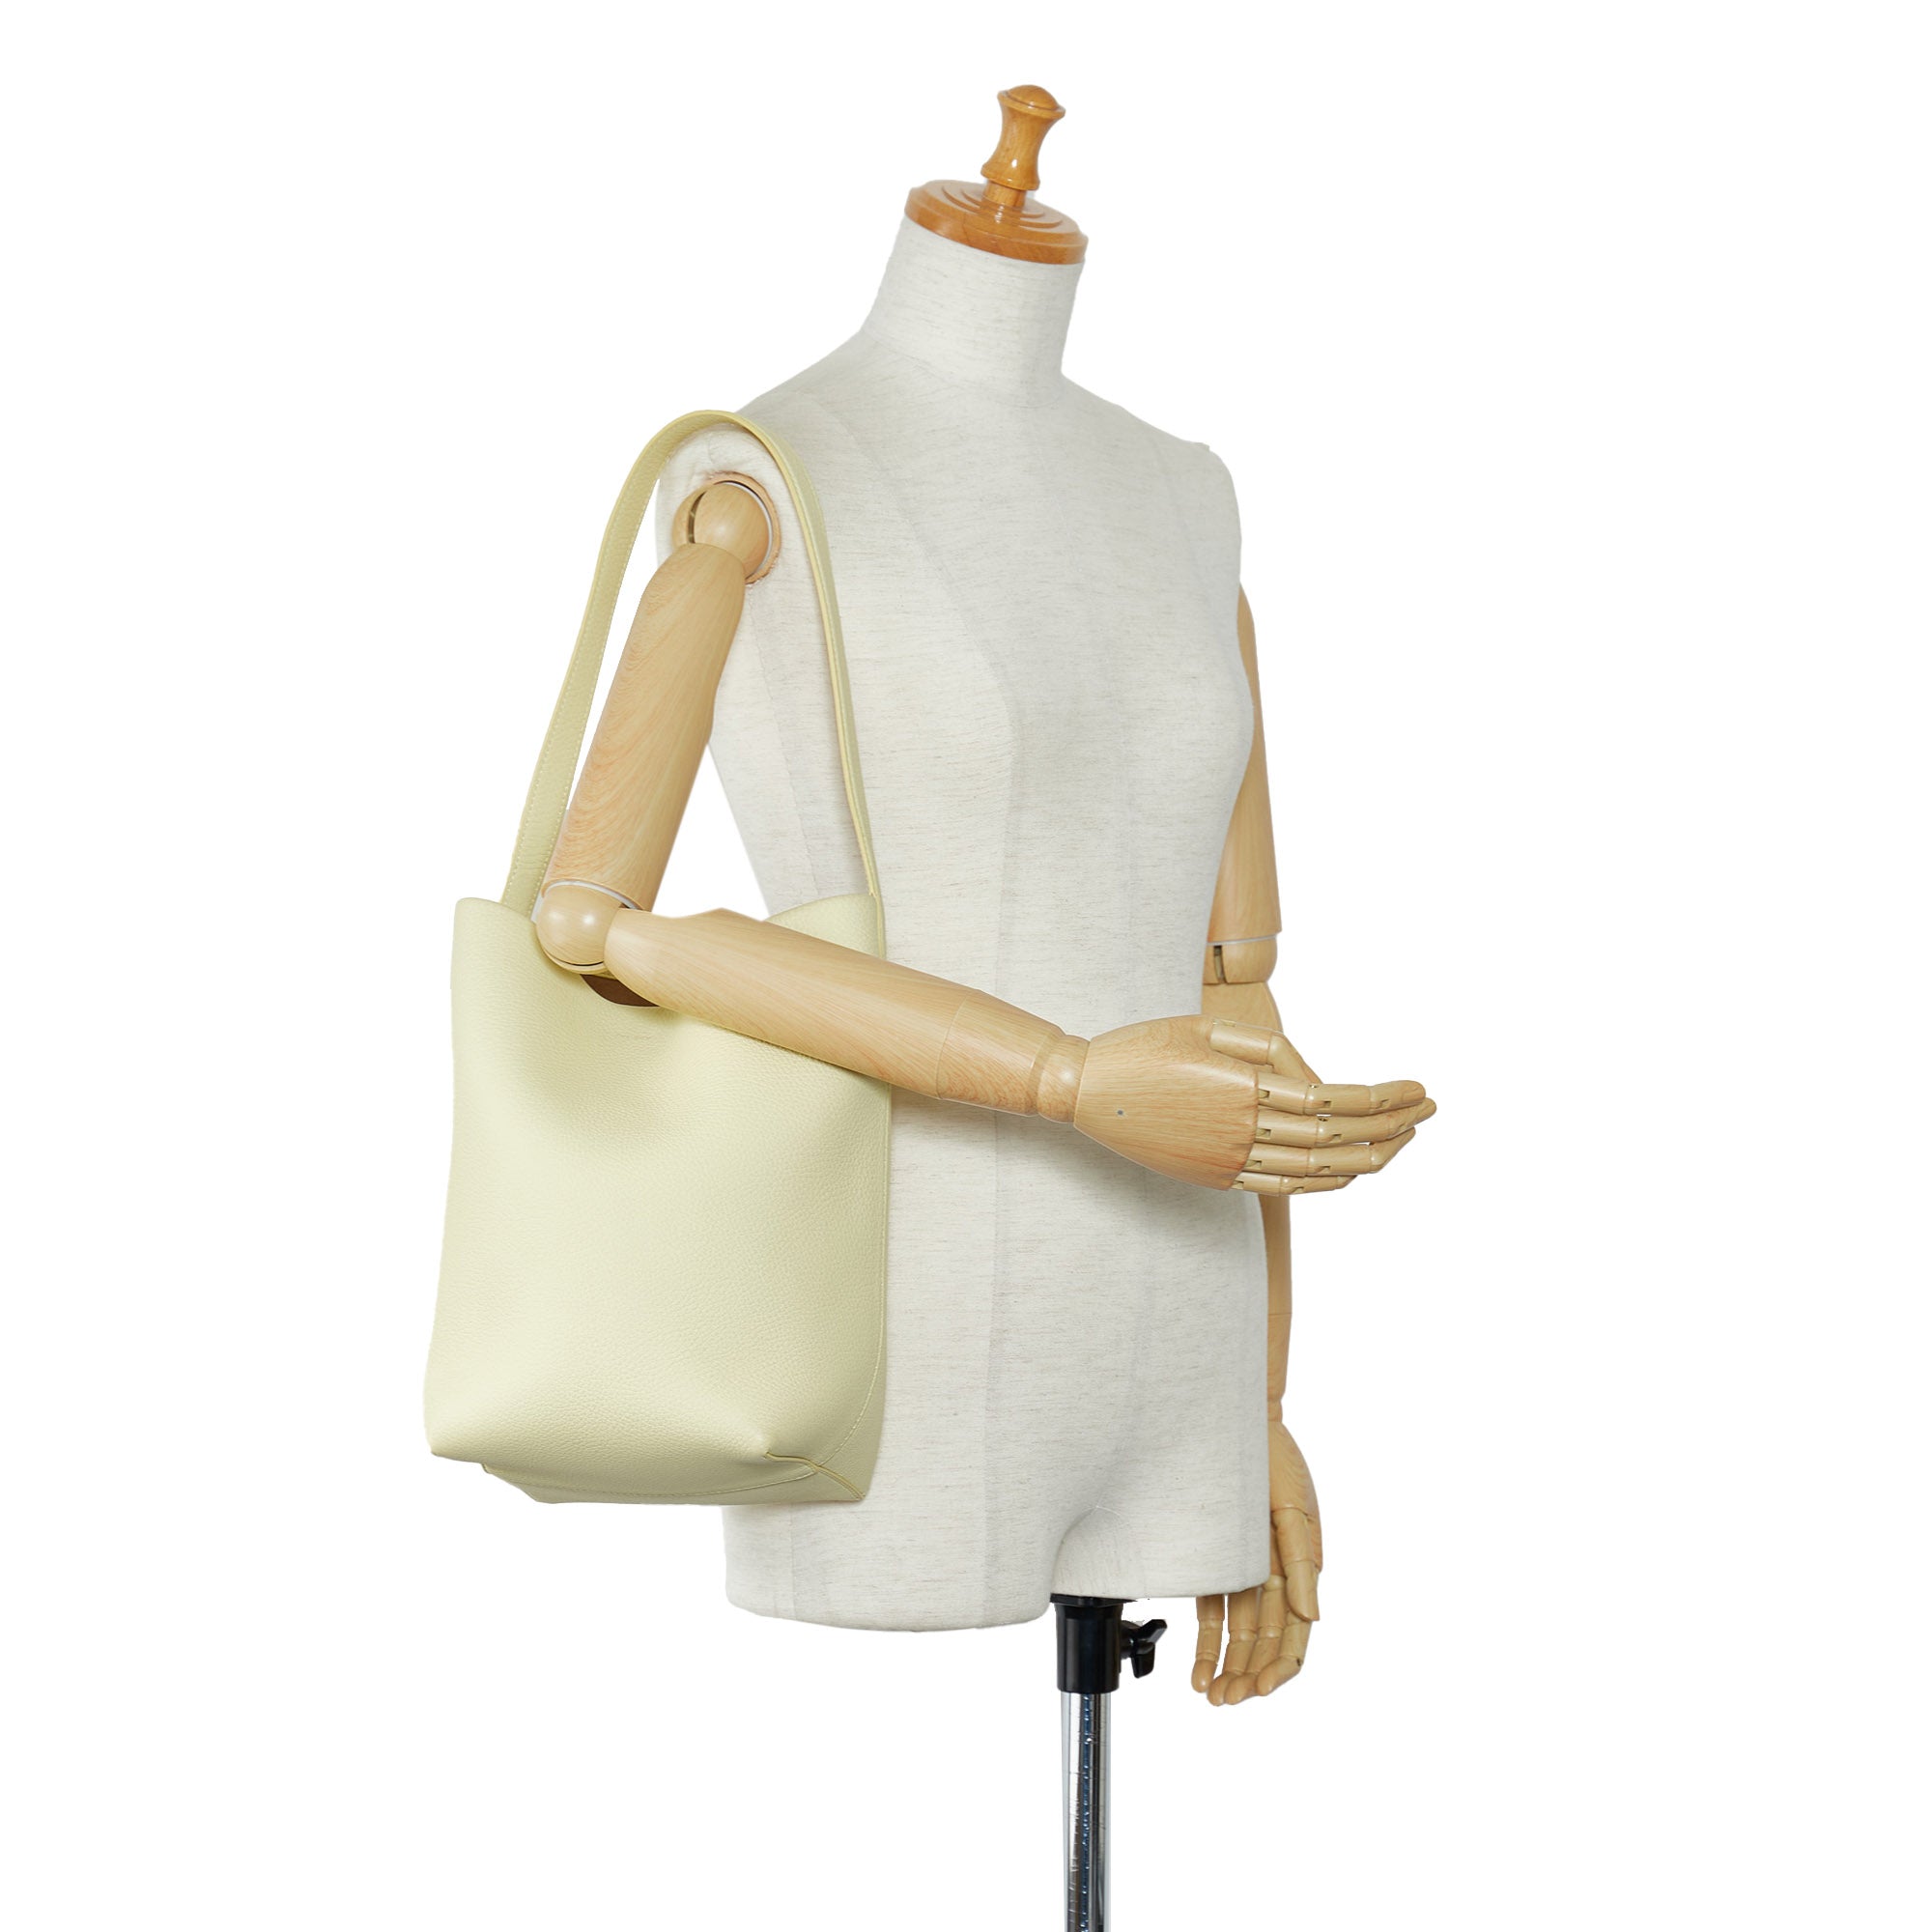 The Row Sideby textured leather shoulder bag